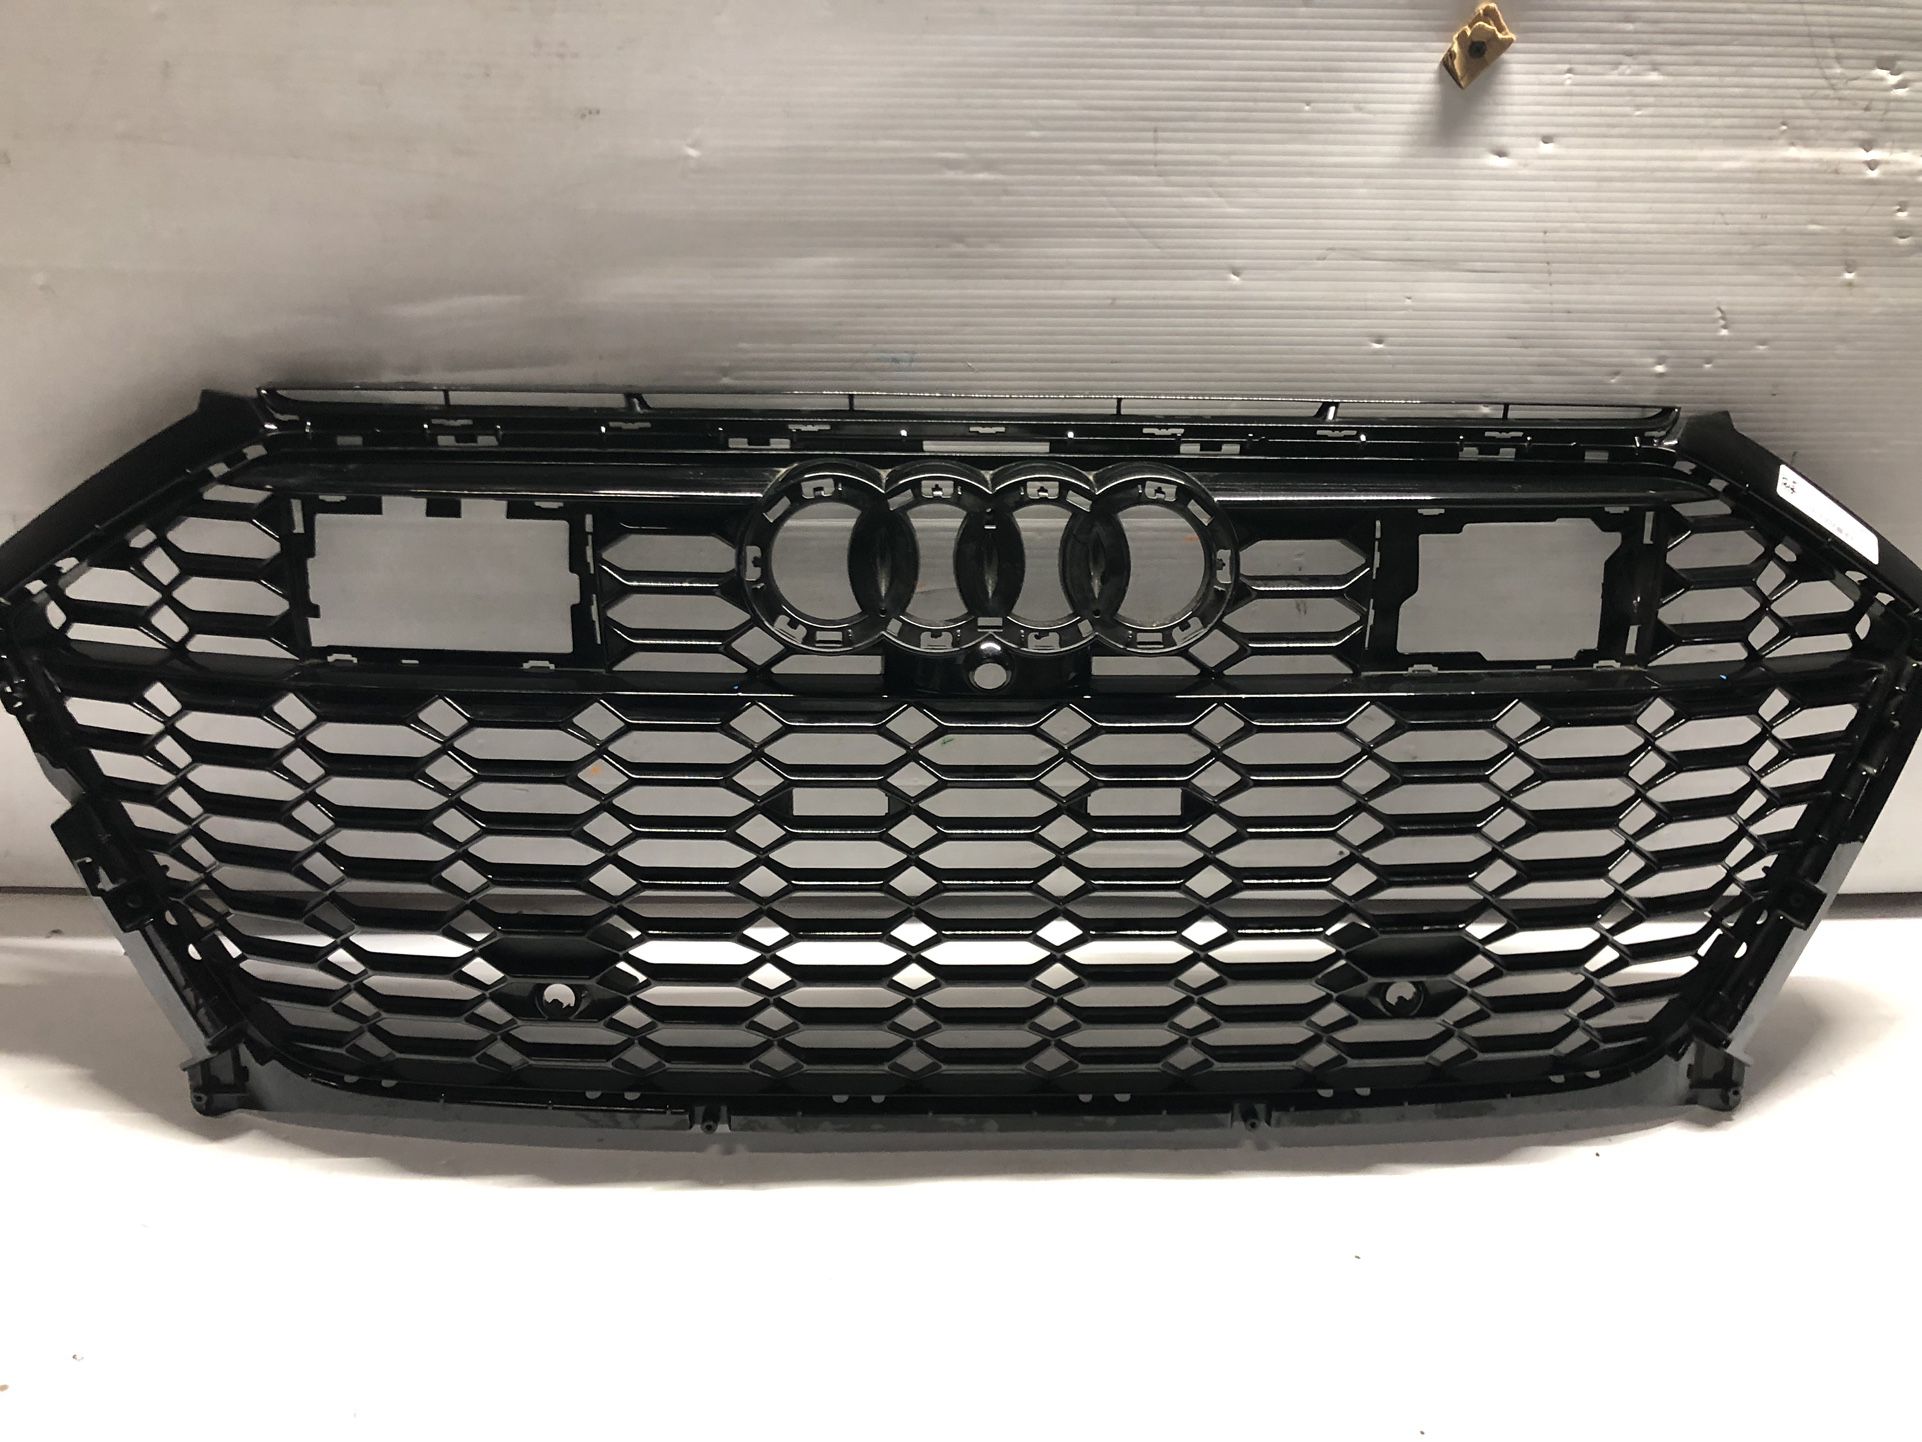 2020 2021 2022 2023 AUDI RS6 RS7 CENTER GRILL BLACK GLOSS